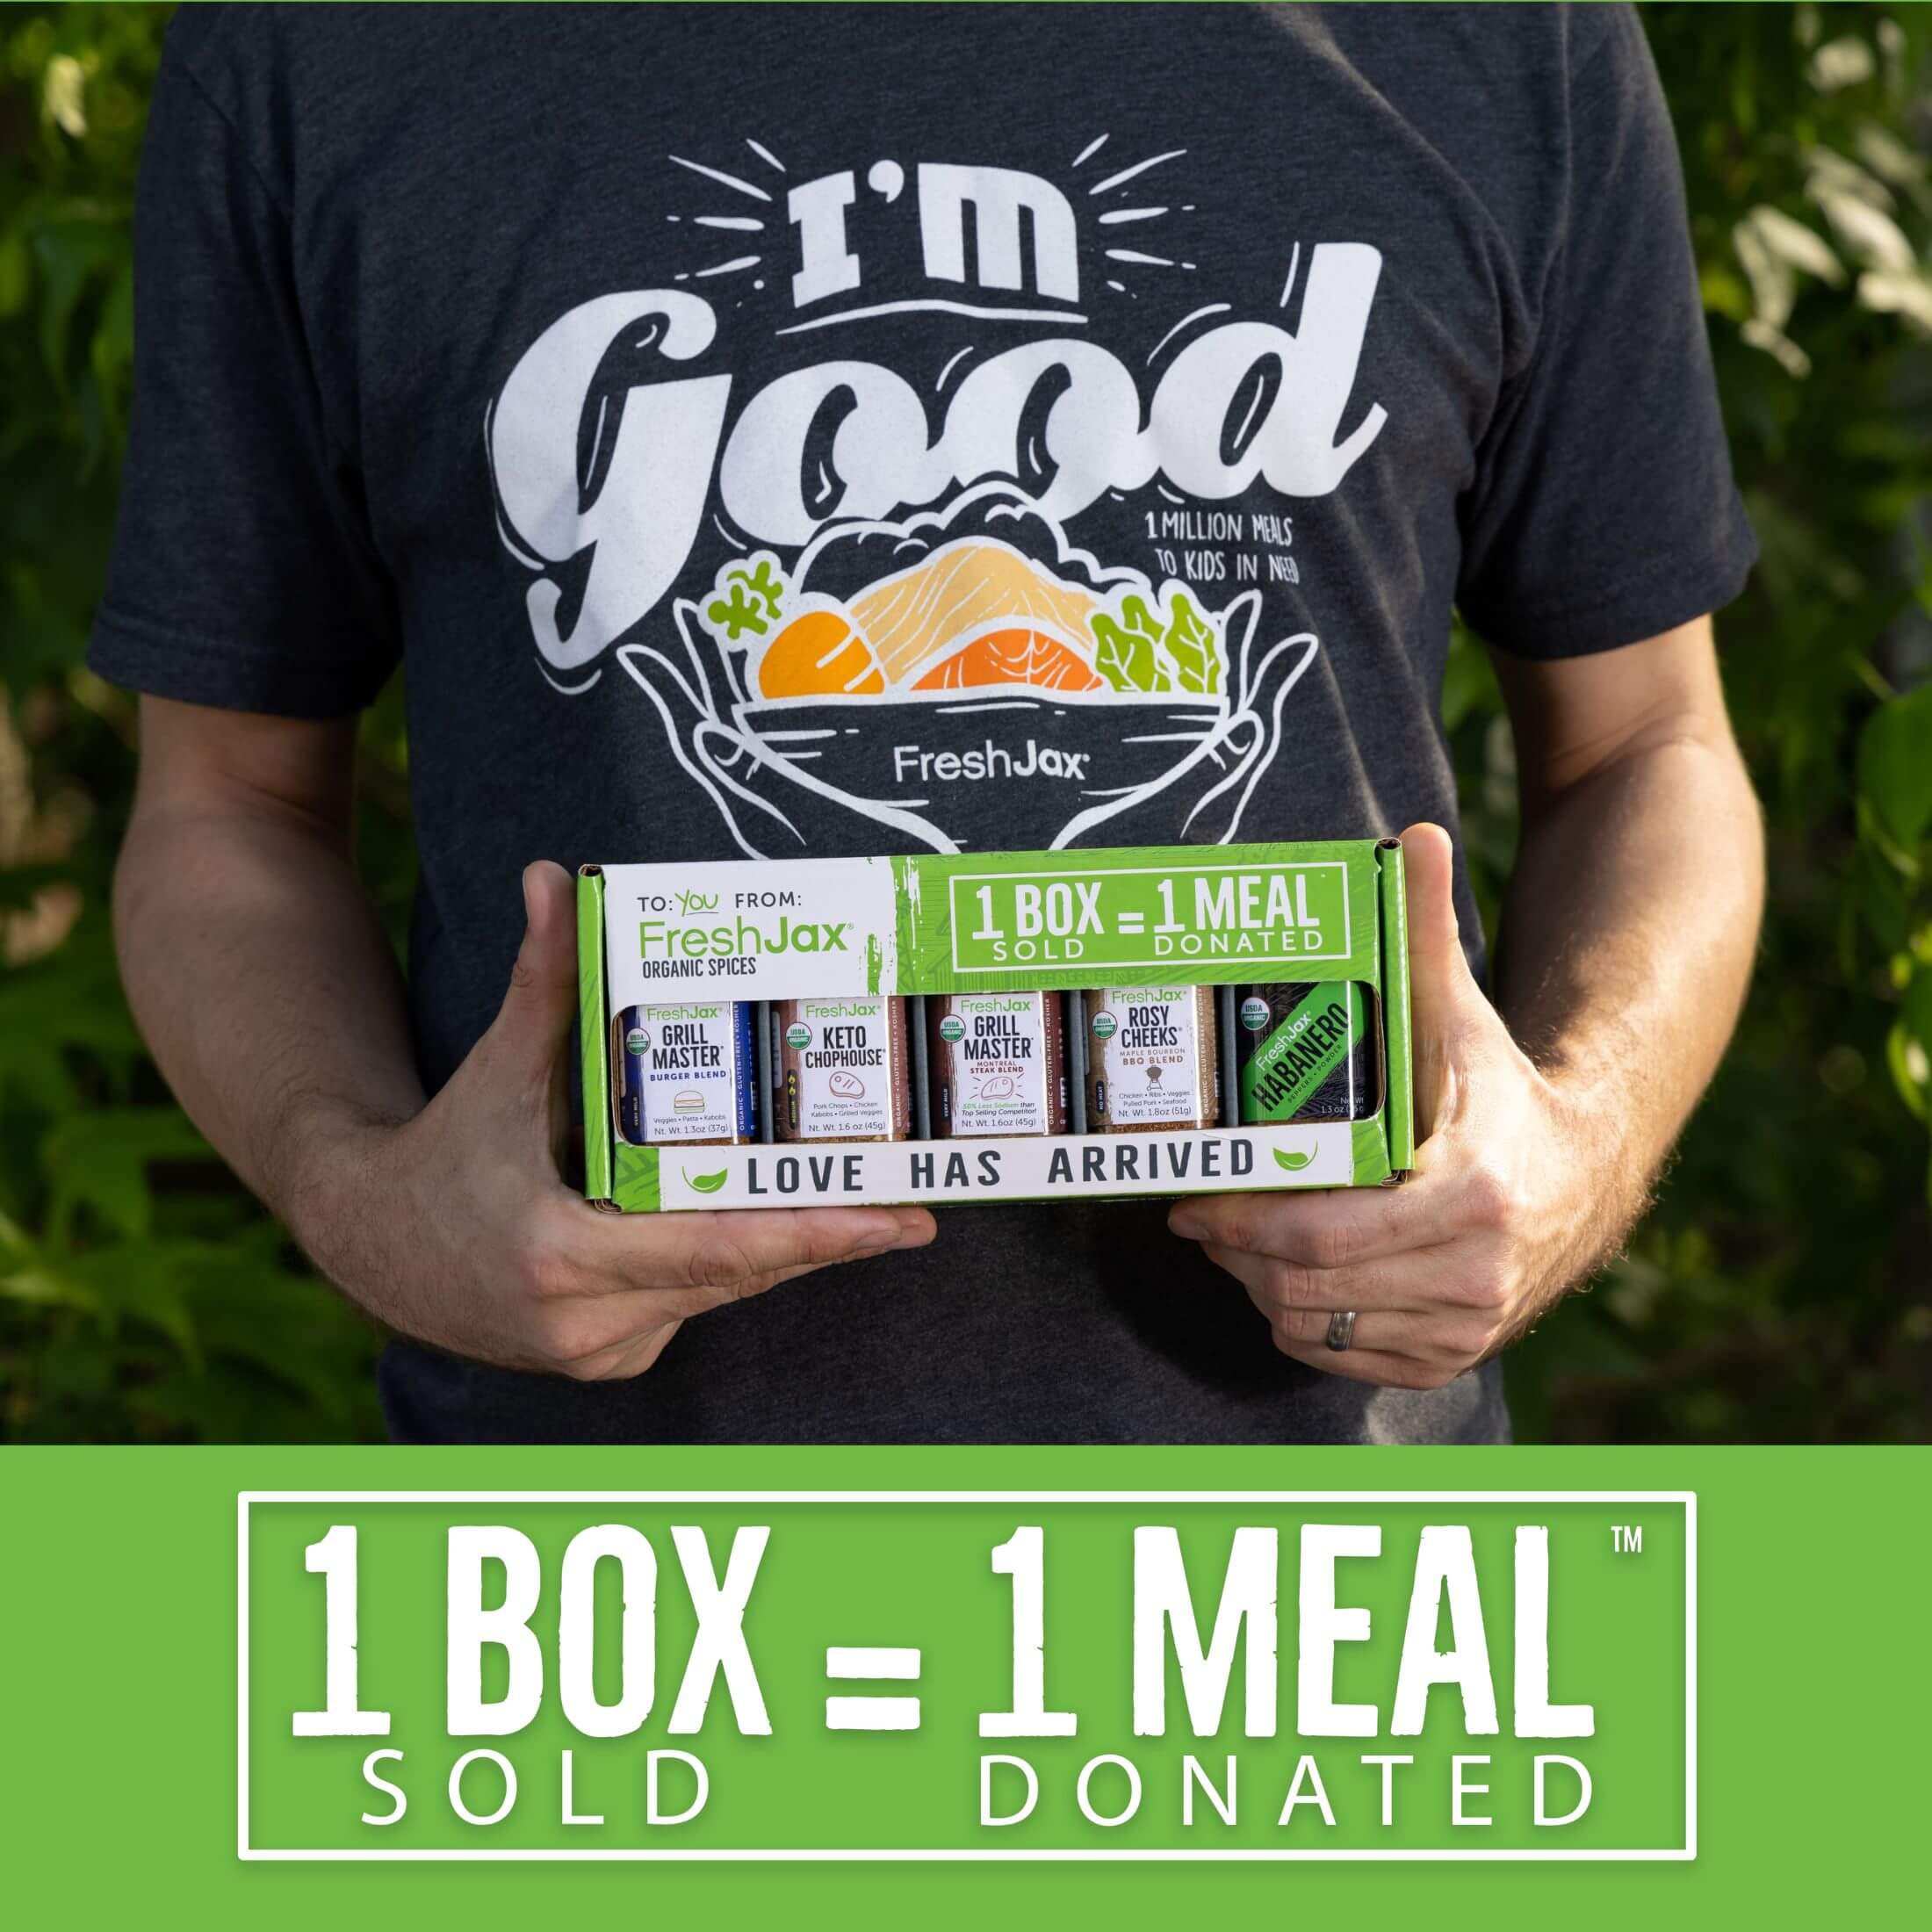 1 Box Sold = 1 Meal Donated